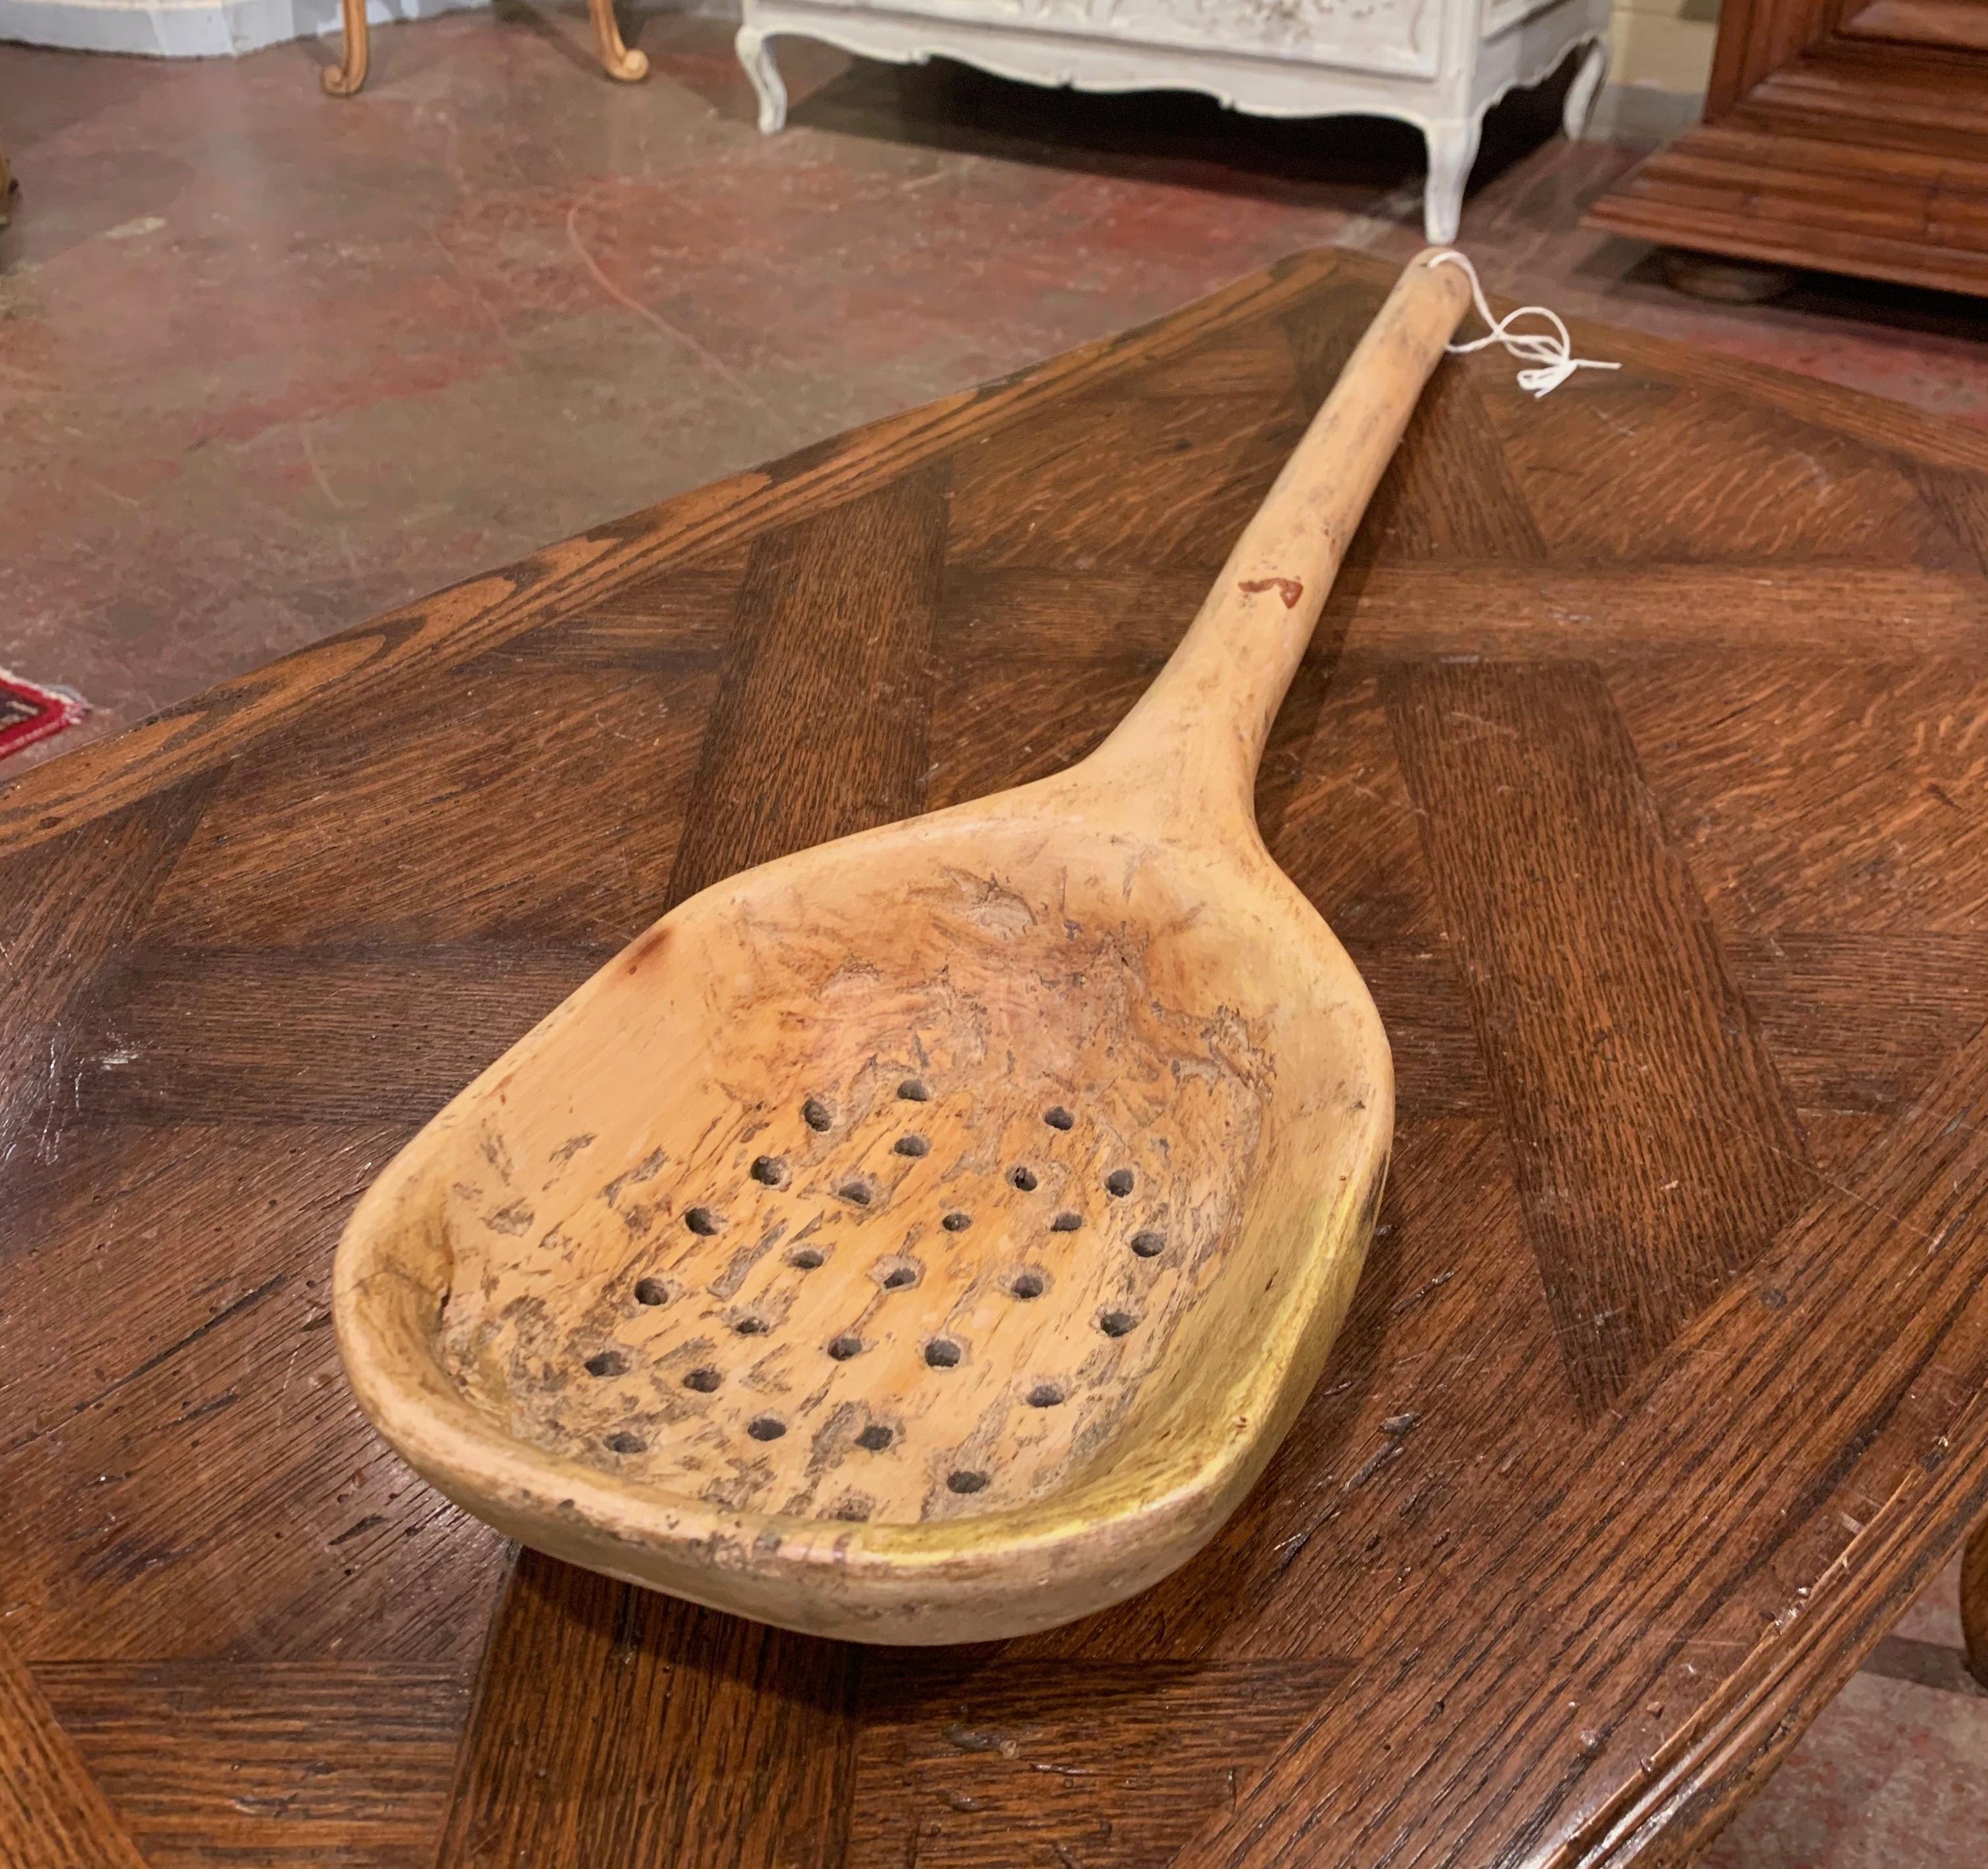 Decorate a kitchen wall with this large country spoon; carved in France circa 1880, the utensil with holes was used for grain in the old days. The long serving spoon is in excellent condition with a rich light walnut patina.
Measures: 31